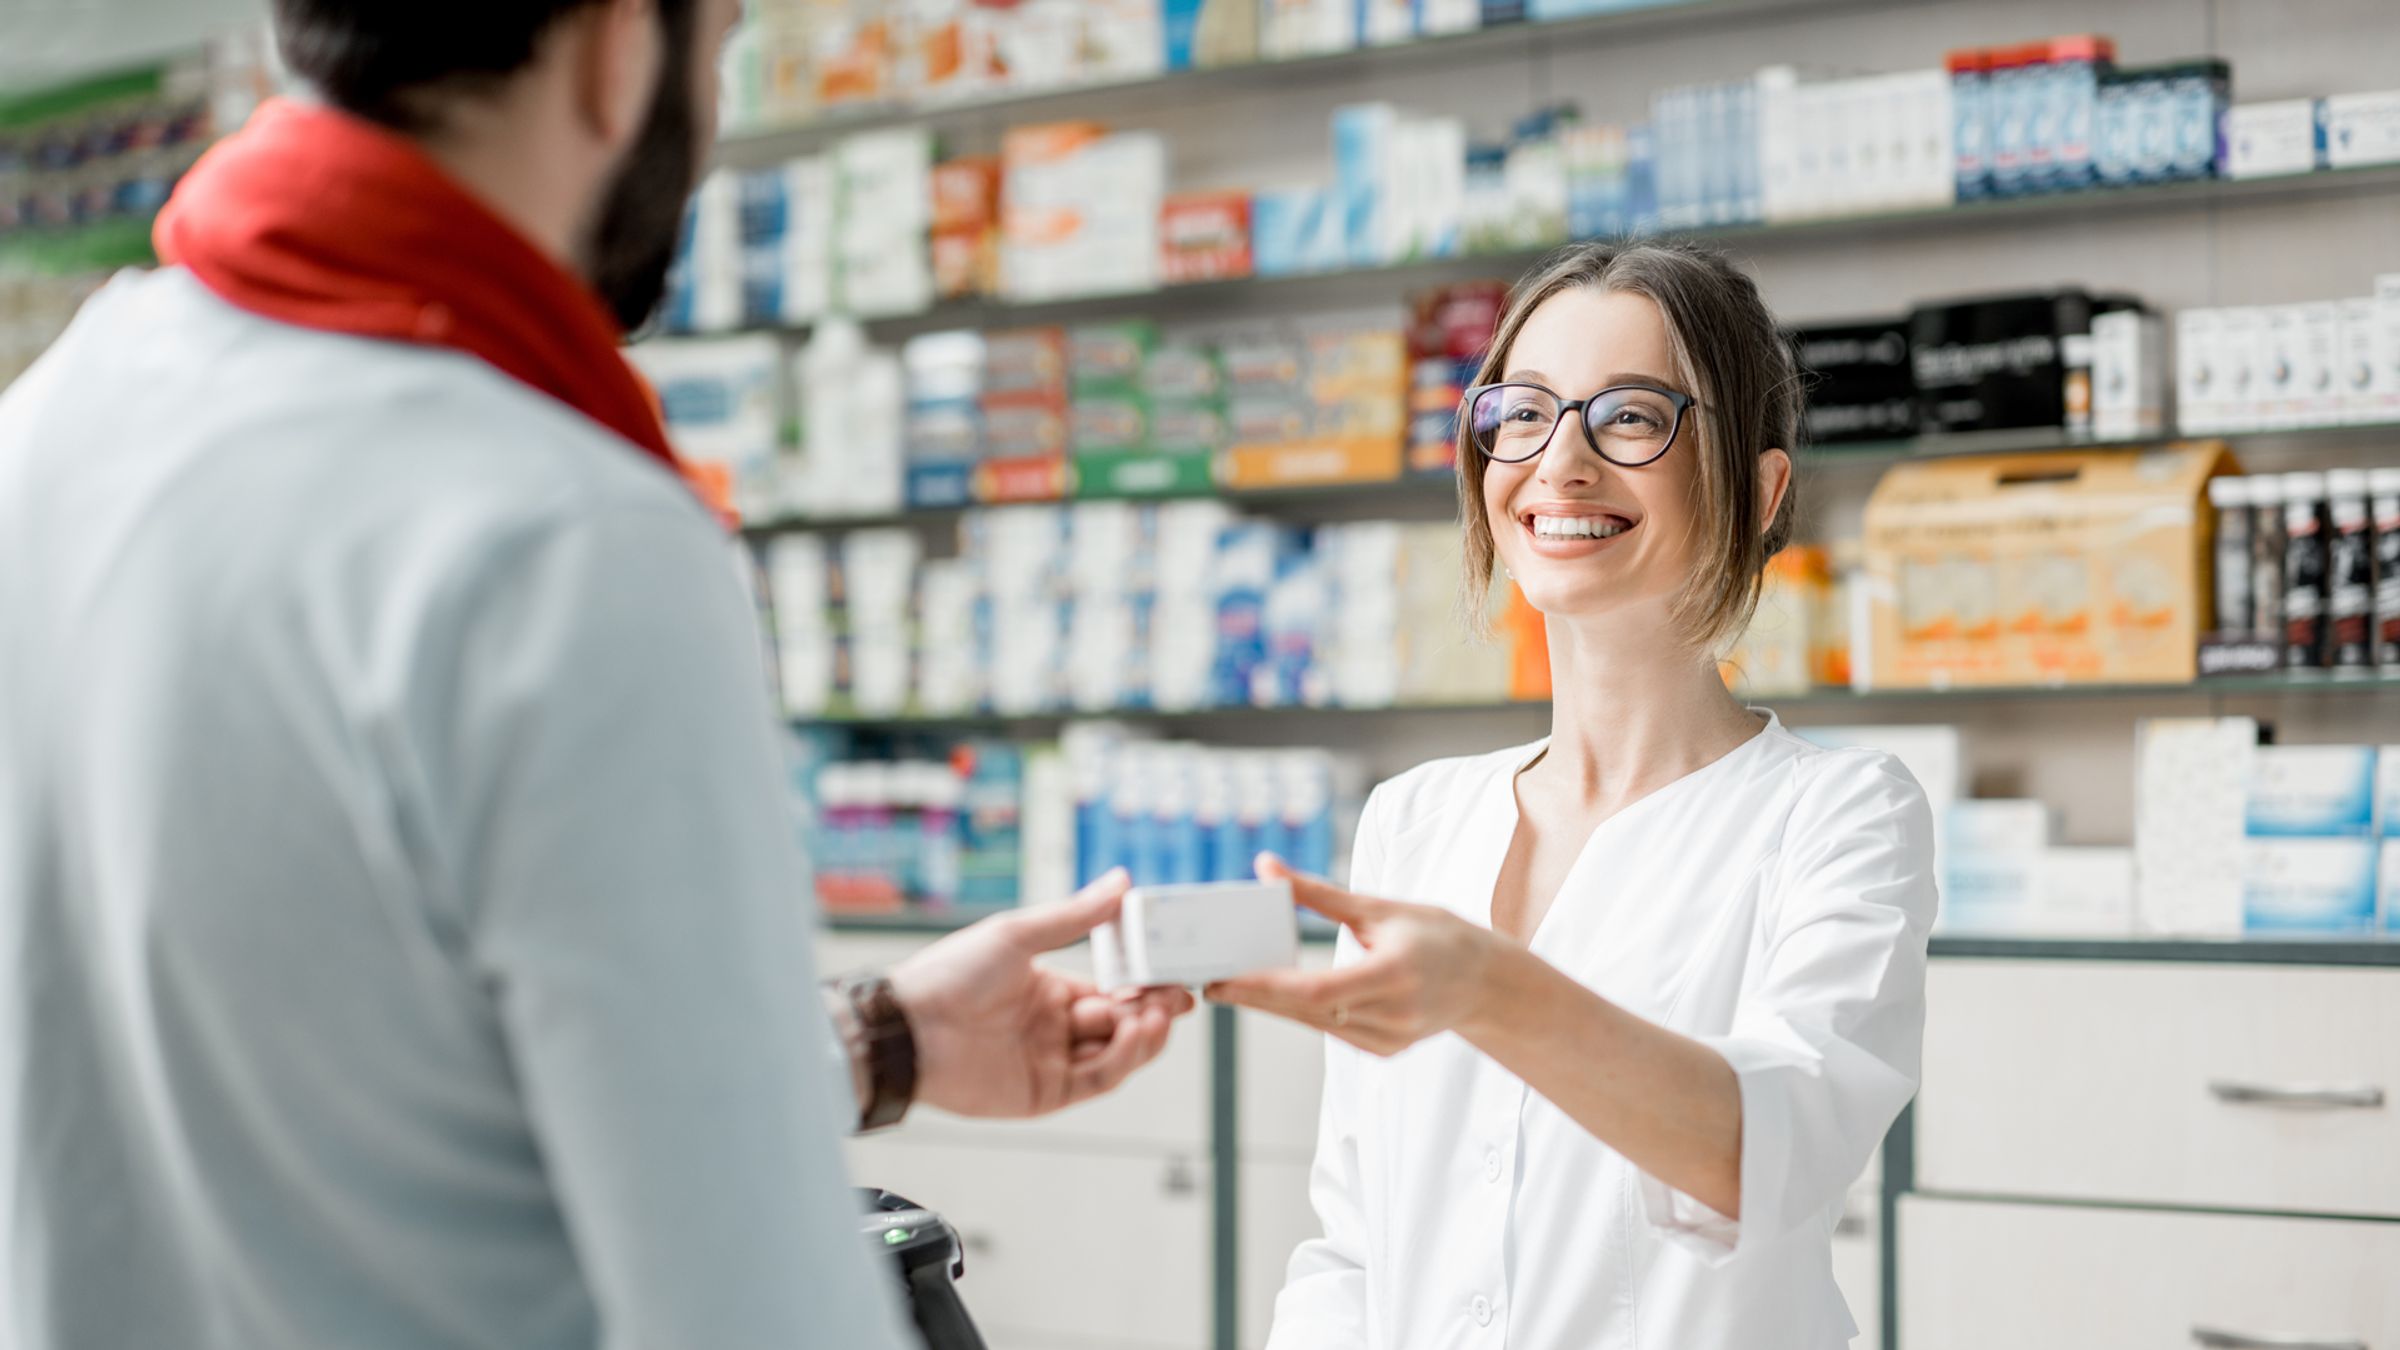 Pharmacist advises a type of medication to a customer